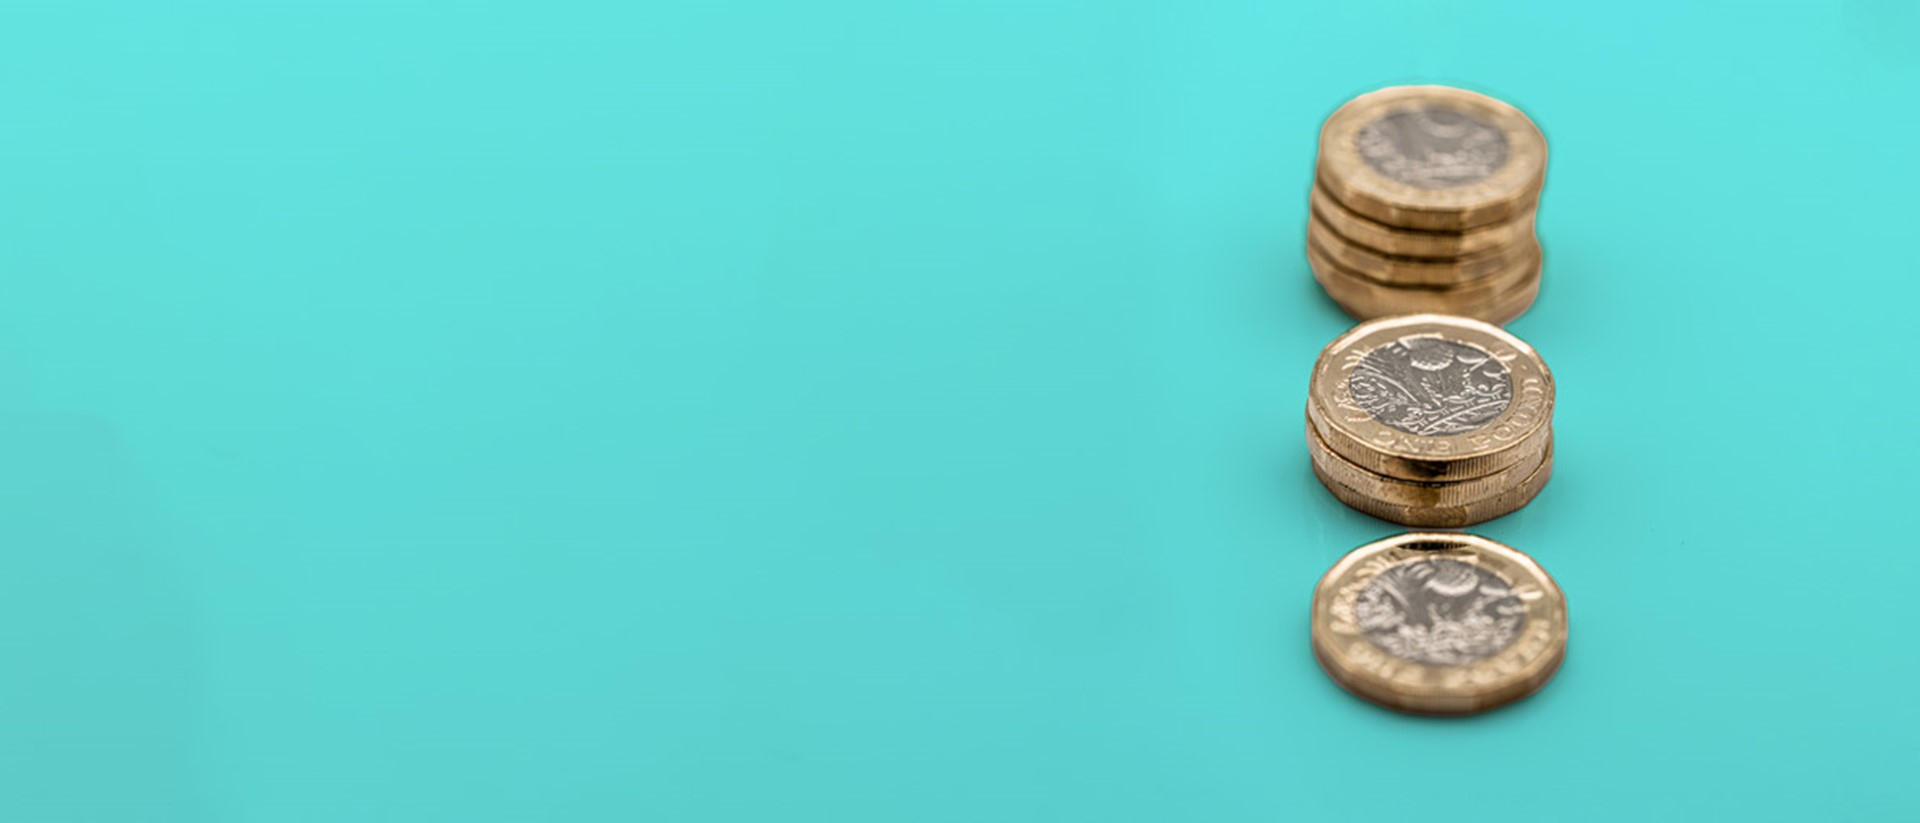 Image showing stacks of pound coins against a teal background